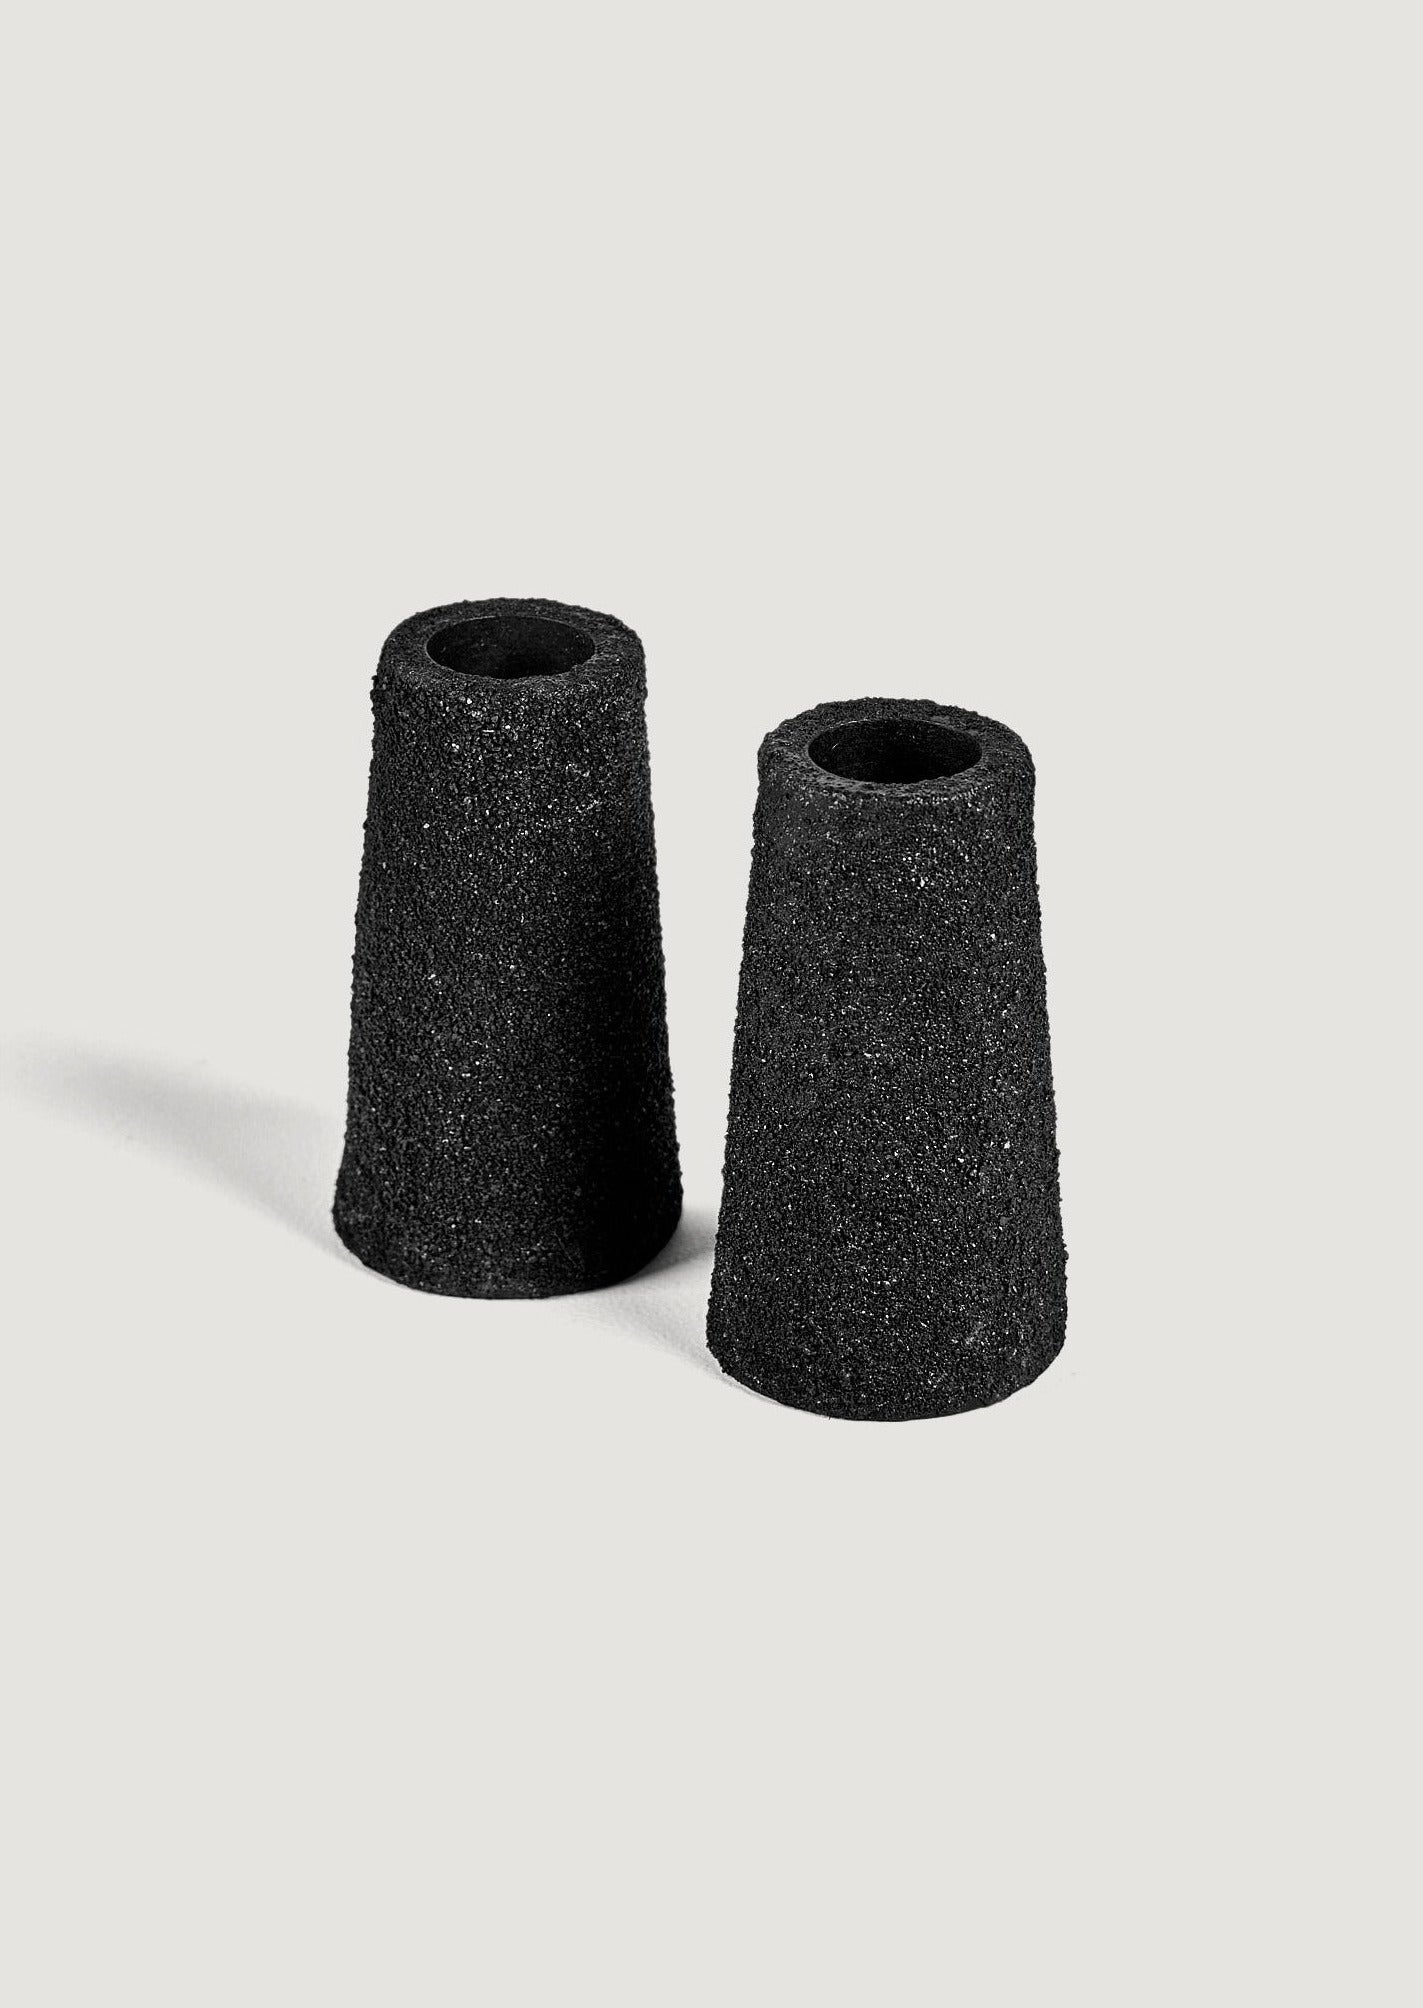 Metal Taper Candle Holders in Black Pumice Textured Finish at Afloral